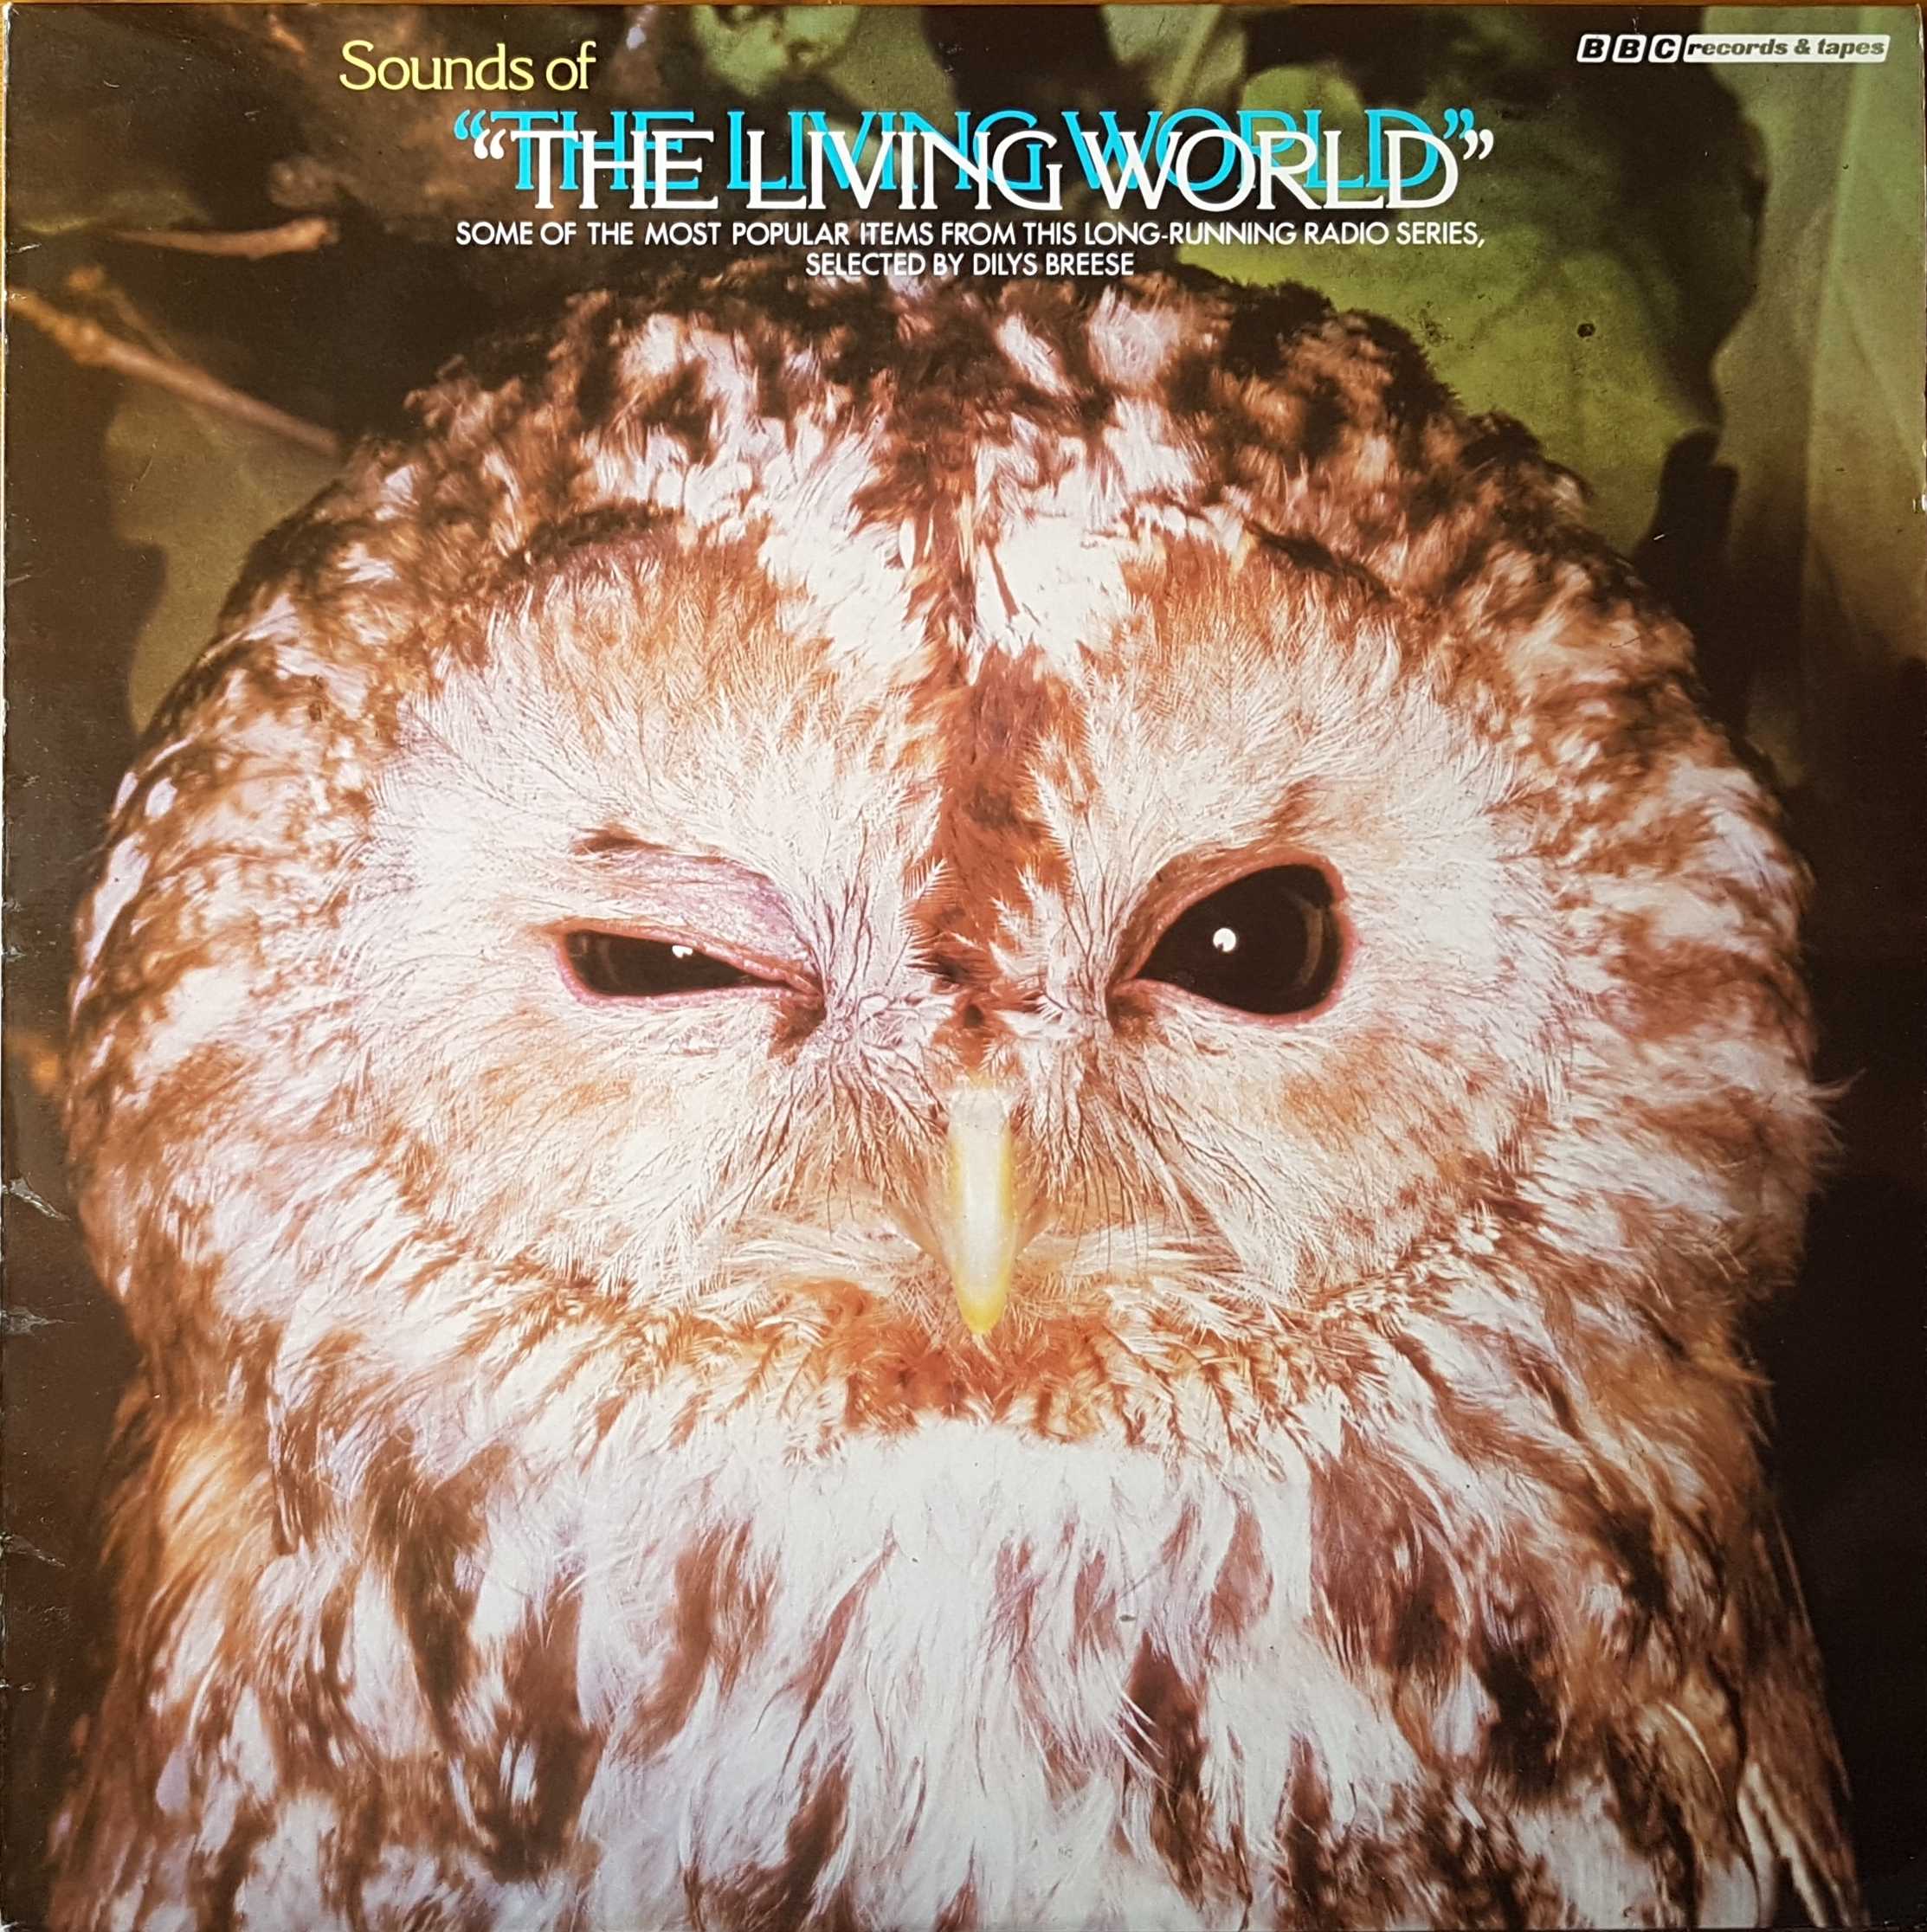 Picture of REC 321 Sounds of the living World by artist Dilys Breese from the BBC albums - Records and Tapes library